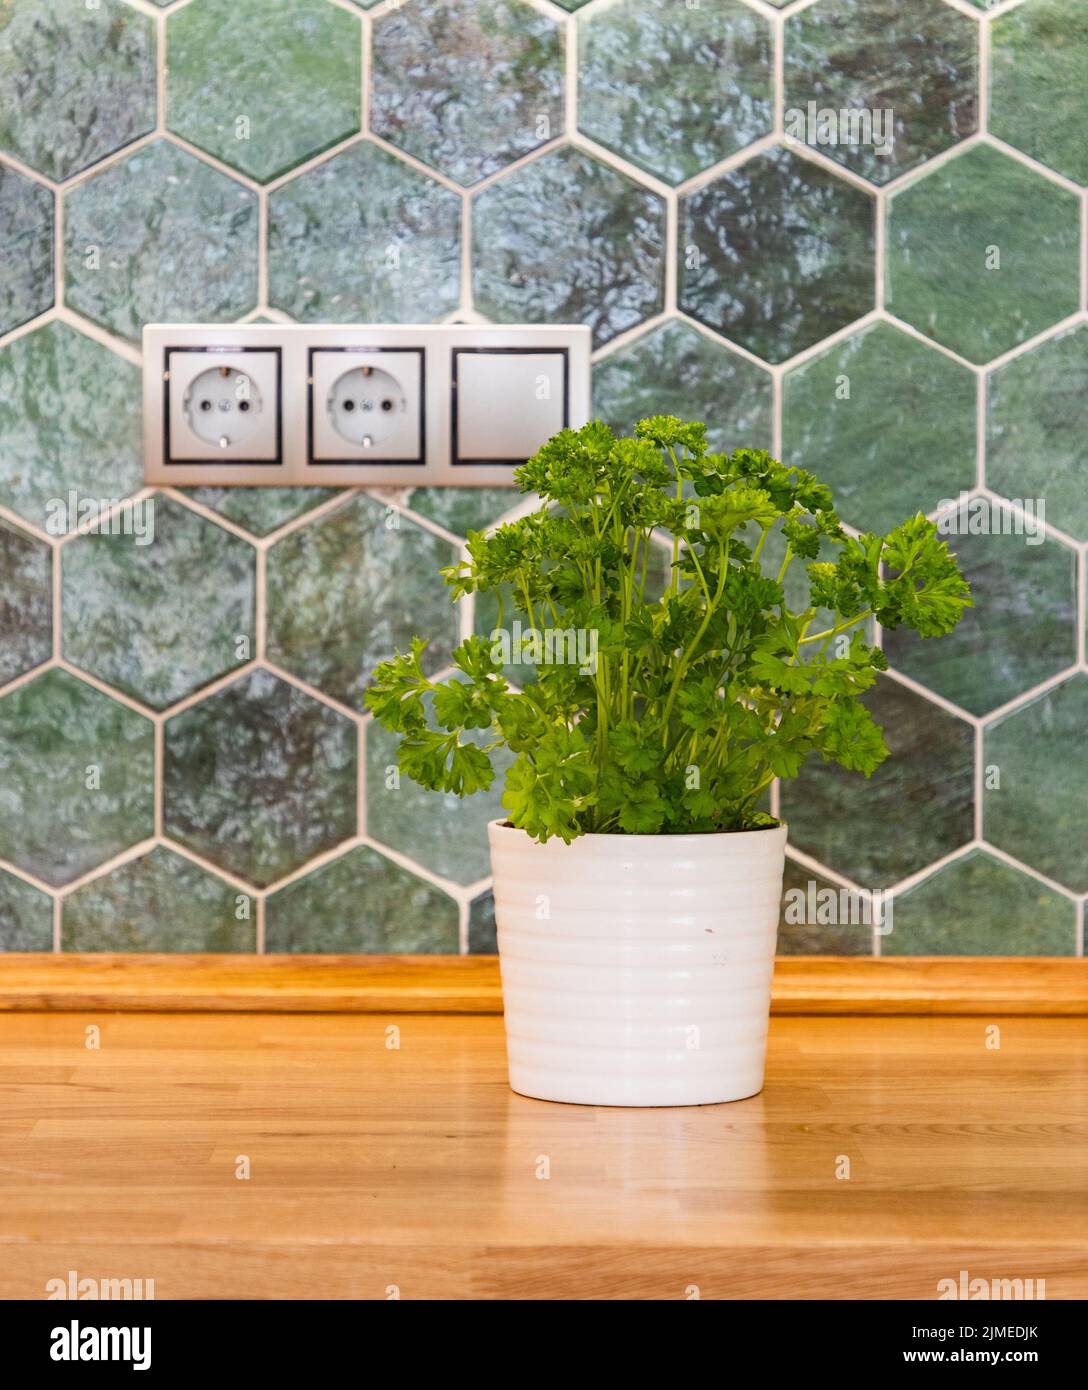 Parsley in pot on wooden kitchen tabletop against vintage green tiles Stock Photo